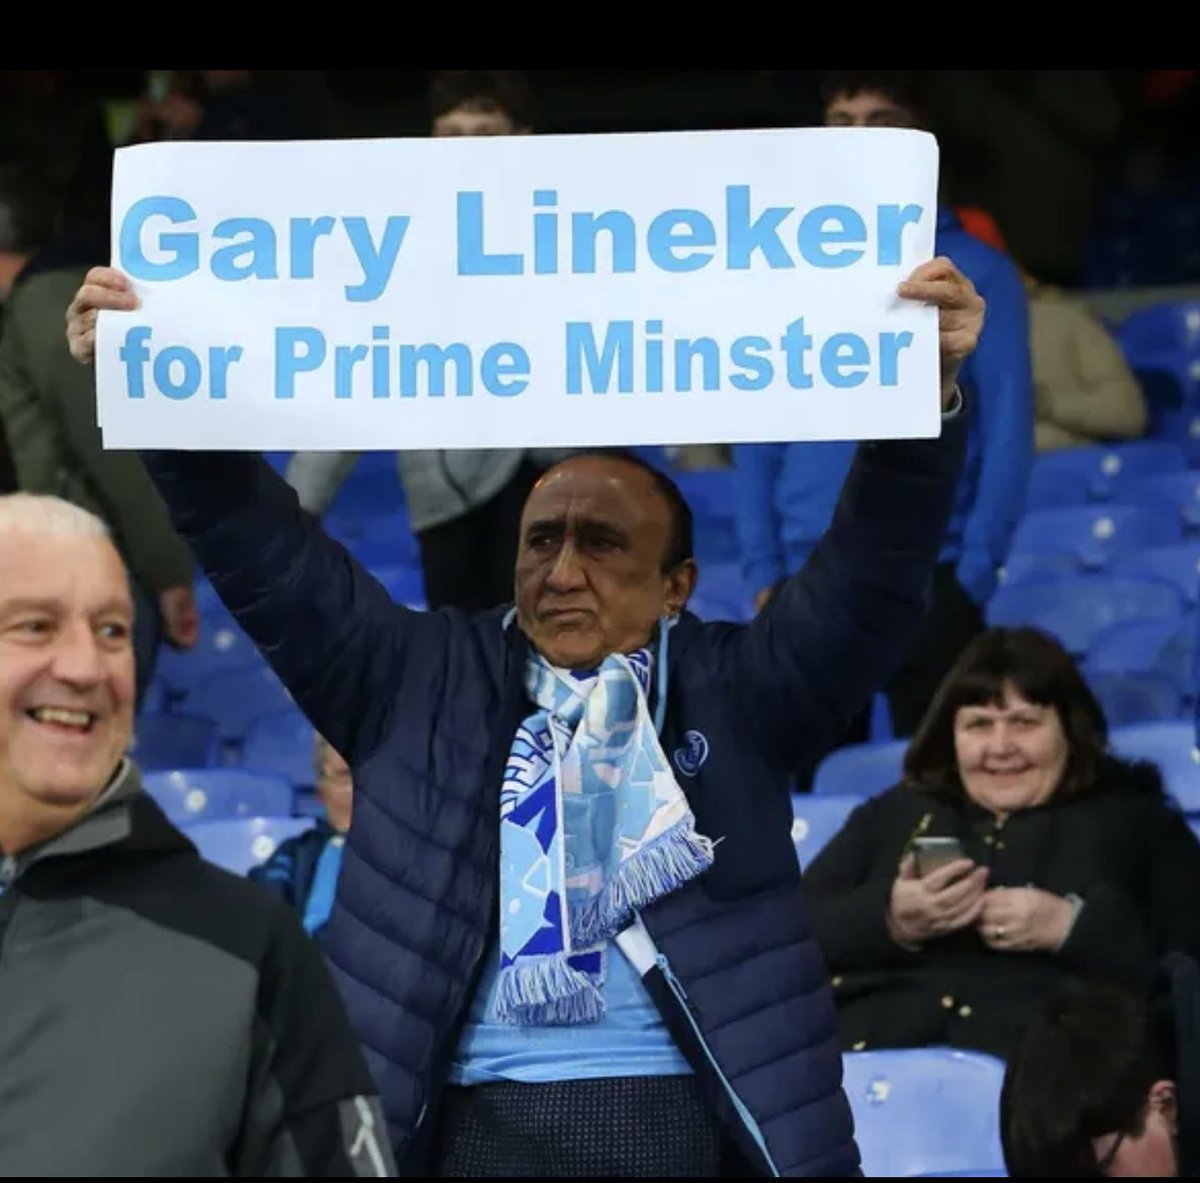 A Manchester City fan holding a sign that reads ‘Gary Lineker for prime minister’ at Selhurst Park in London. 

Photograph: Katie Chan/Action Plus/REX/Shutterstock

#CRYMCI
#WeStandWithGary 
#IStandWithGary 
#EnoughIsEnough
#ToriesUnfitToGovern 
#ToriesOut247
#BoycottMOTD